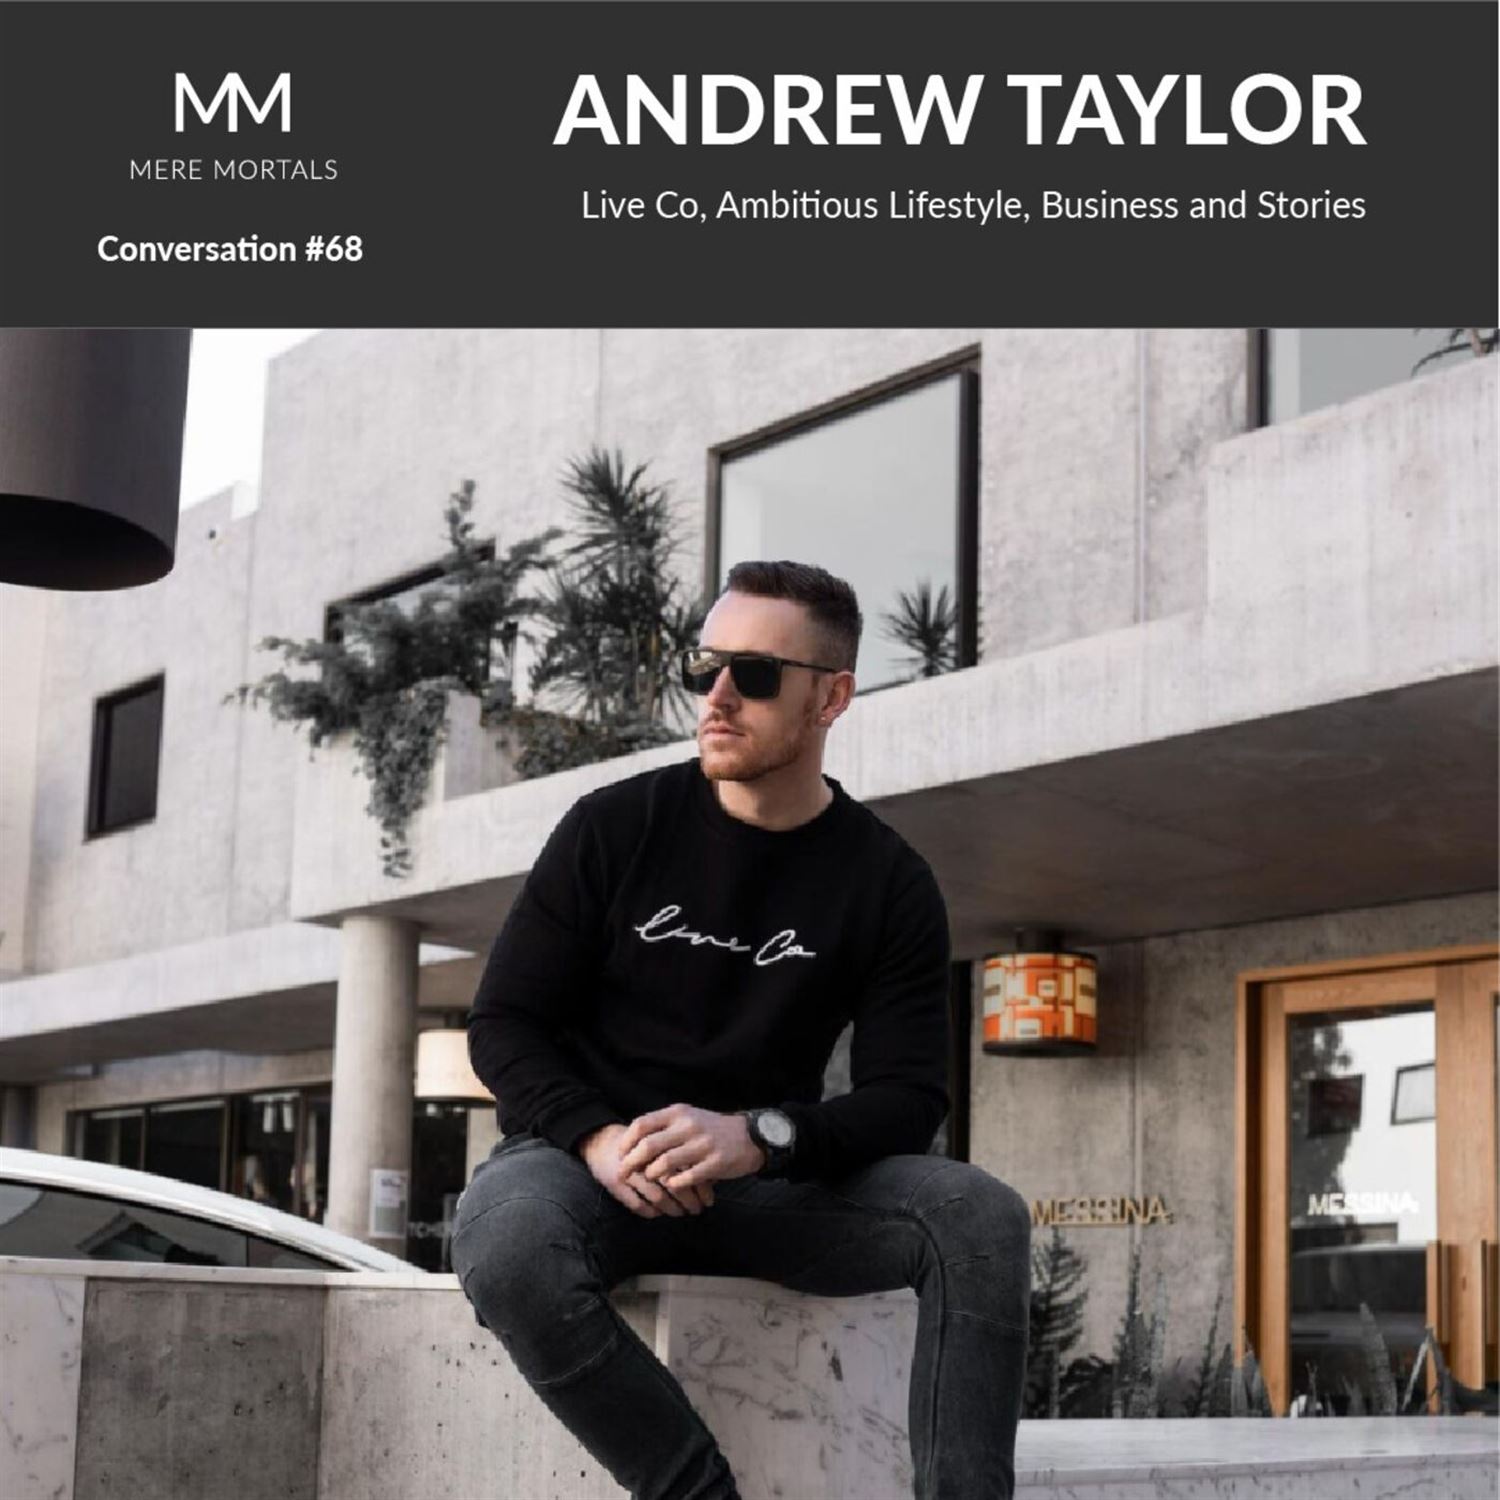 ANDREW TAYLOR | Live_Co x ambitious lifestyle, business, lifestyle and stories